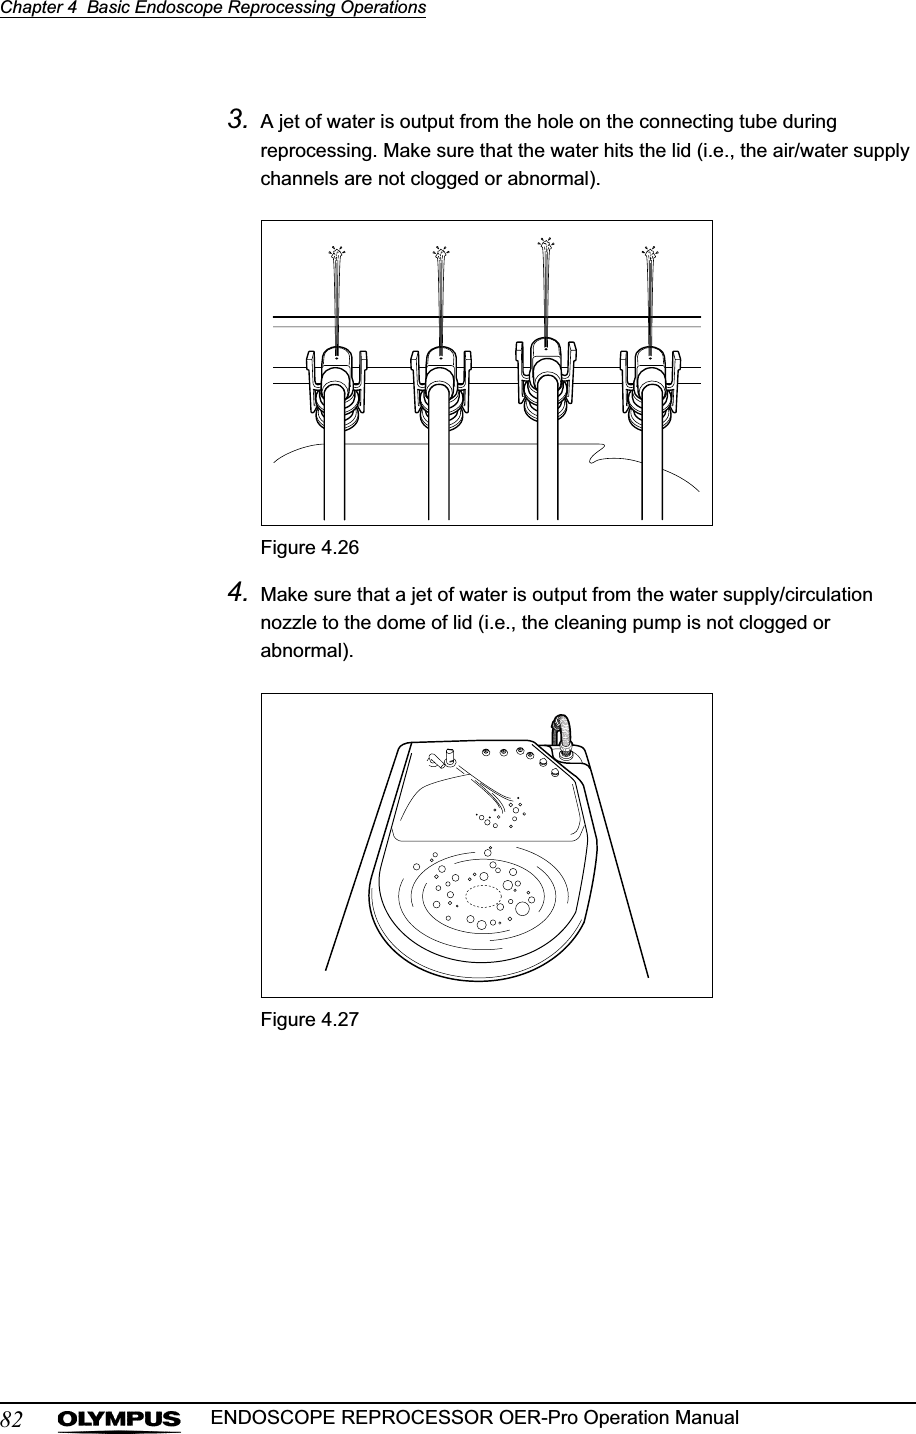 82Chapter 4  Basic Endoscope Reprocessing OperationsENDOSCOPE REPROCESSOR OER-Pro Operation Manual3. A jet of water is output from the hole on the connecting tube during reprocessing. Make sure that the water hits the lid (i.e., the air/water supply channels are not clogged or abnormal).Figure 4.264. Make sure that a jet of water is output from the water supply/circulation nozzle to the dome of lid (i.e., the cleaning pump is not clogged or abnormal).Figure 4.27